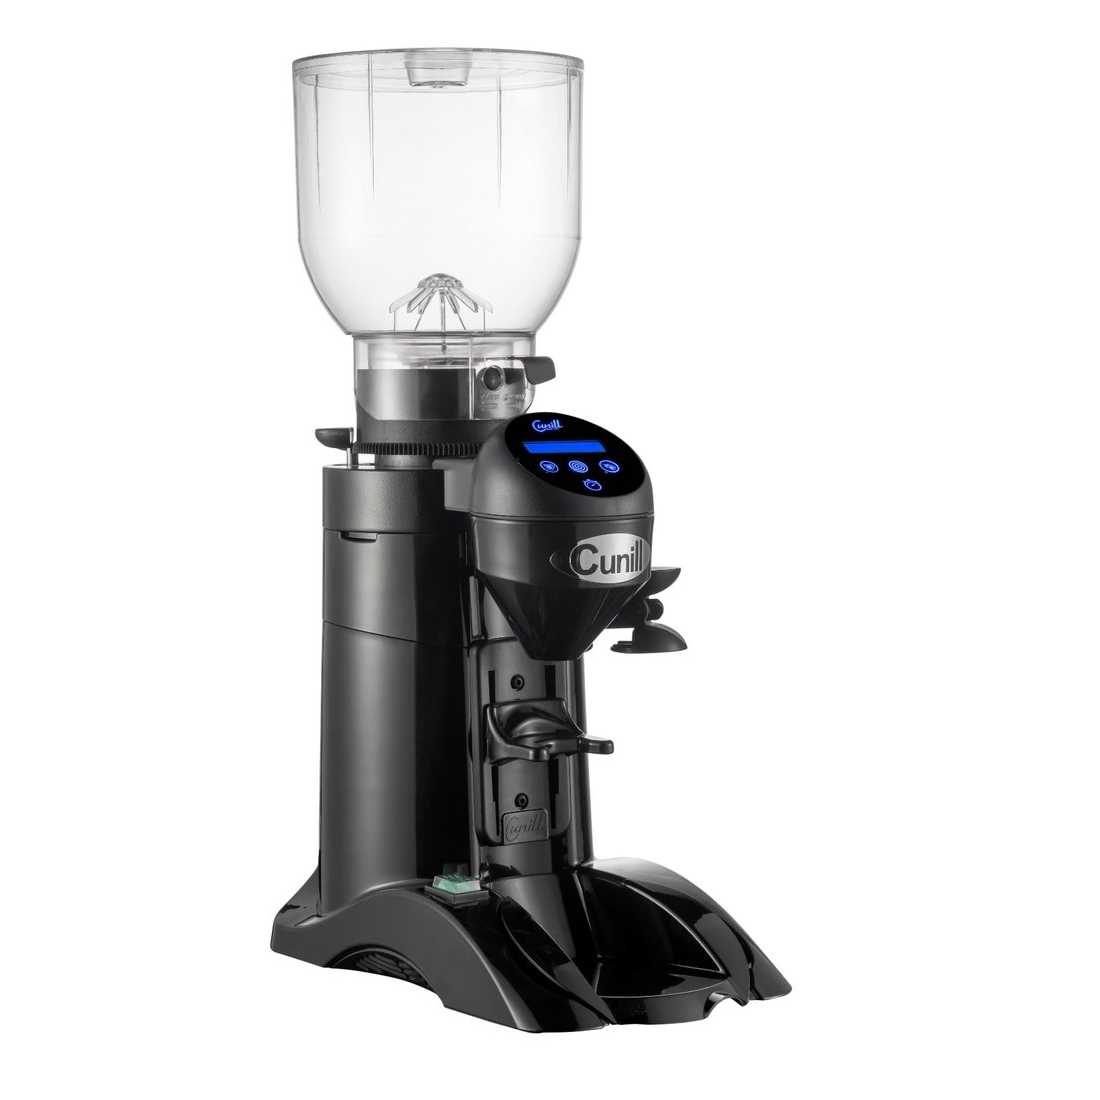 Cunill Jamaica-Tron, Automatic On Demand Coffee Grinder